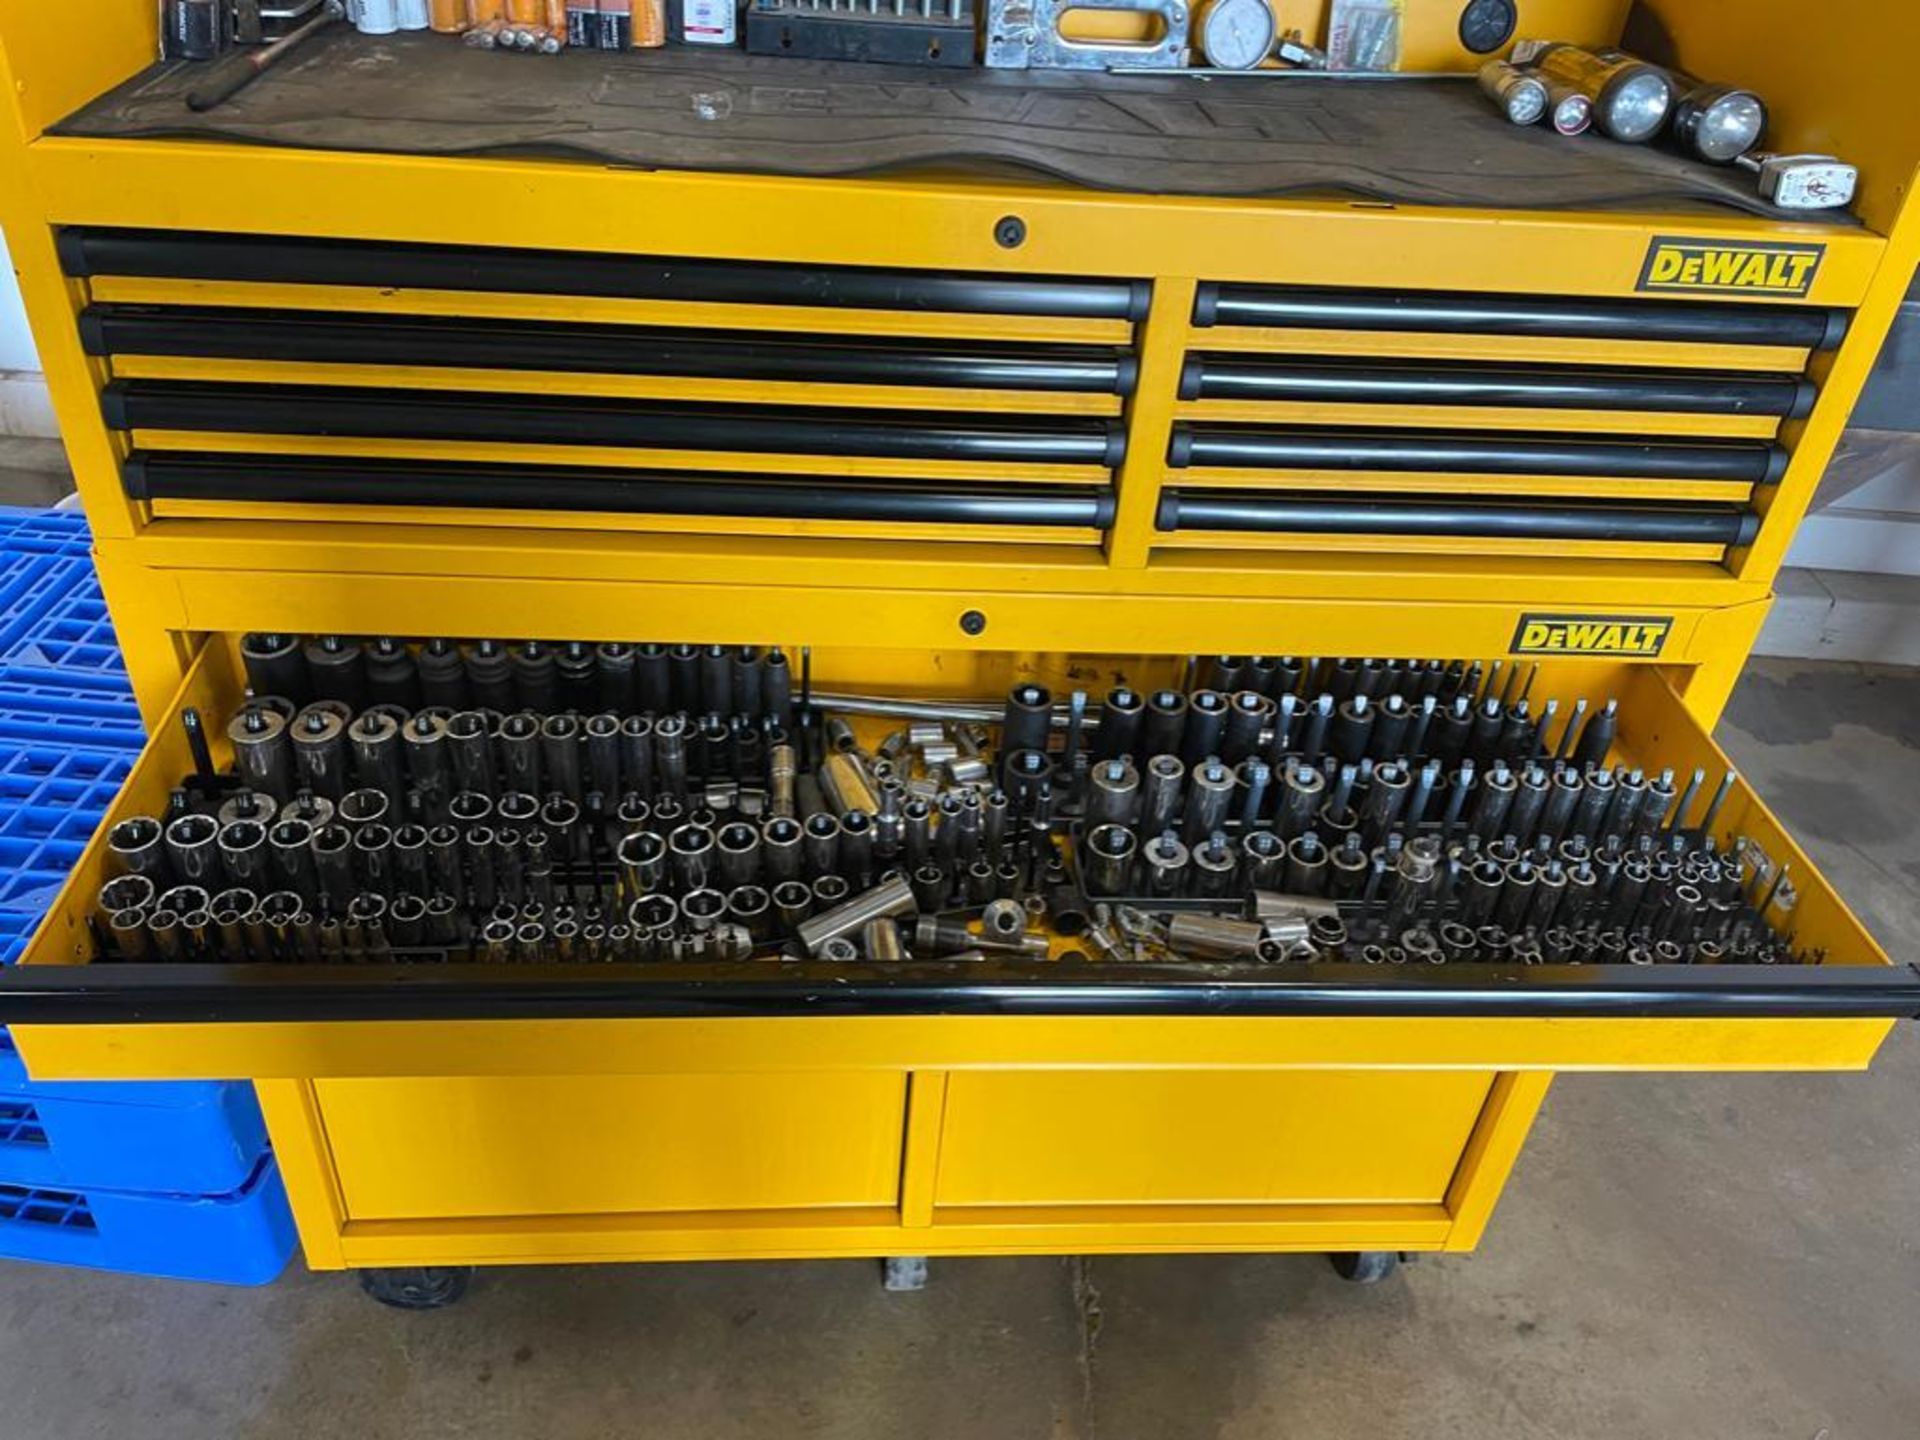 DeWalt Mechanics Tool Box with Contents, Wrenches, Sockets, Plyers, Pipe Wrench, Screwdrivers, etc. - Image 15 of 24